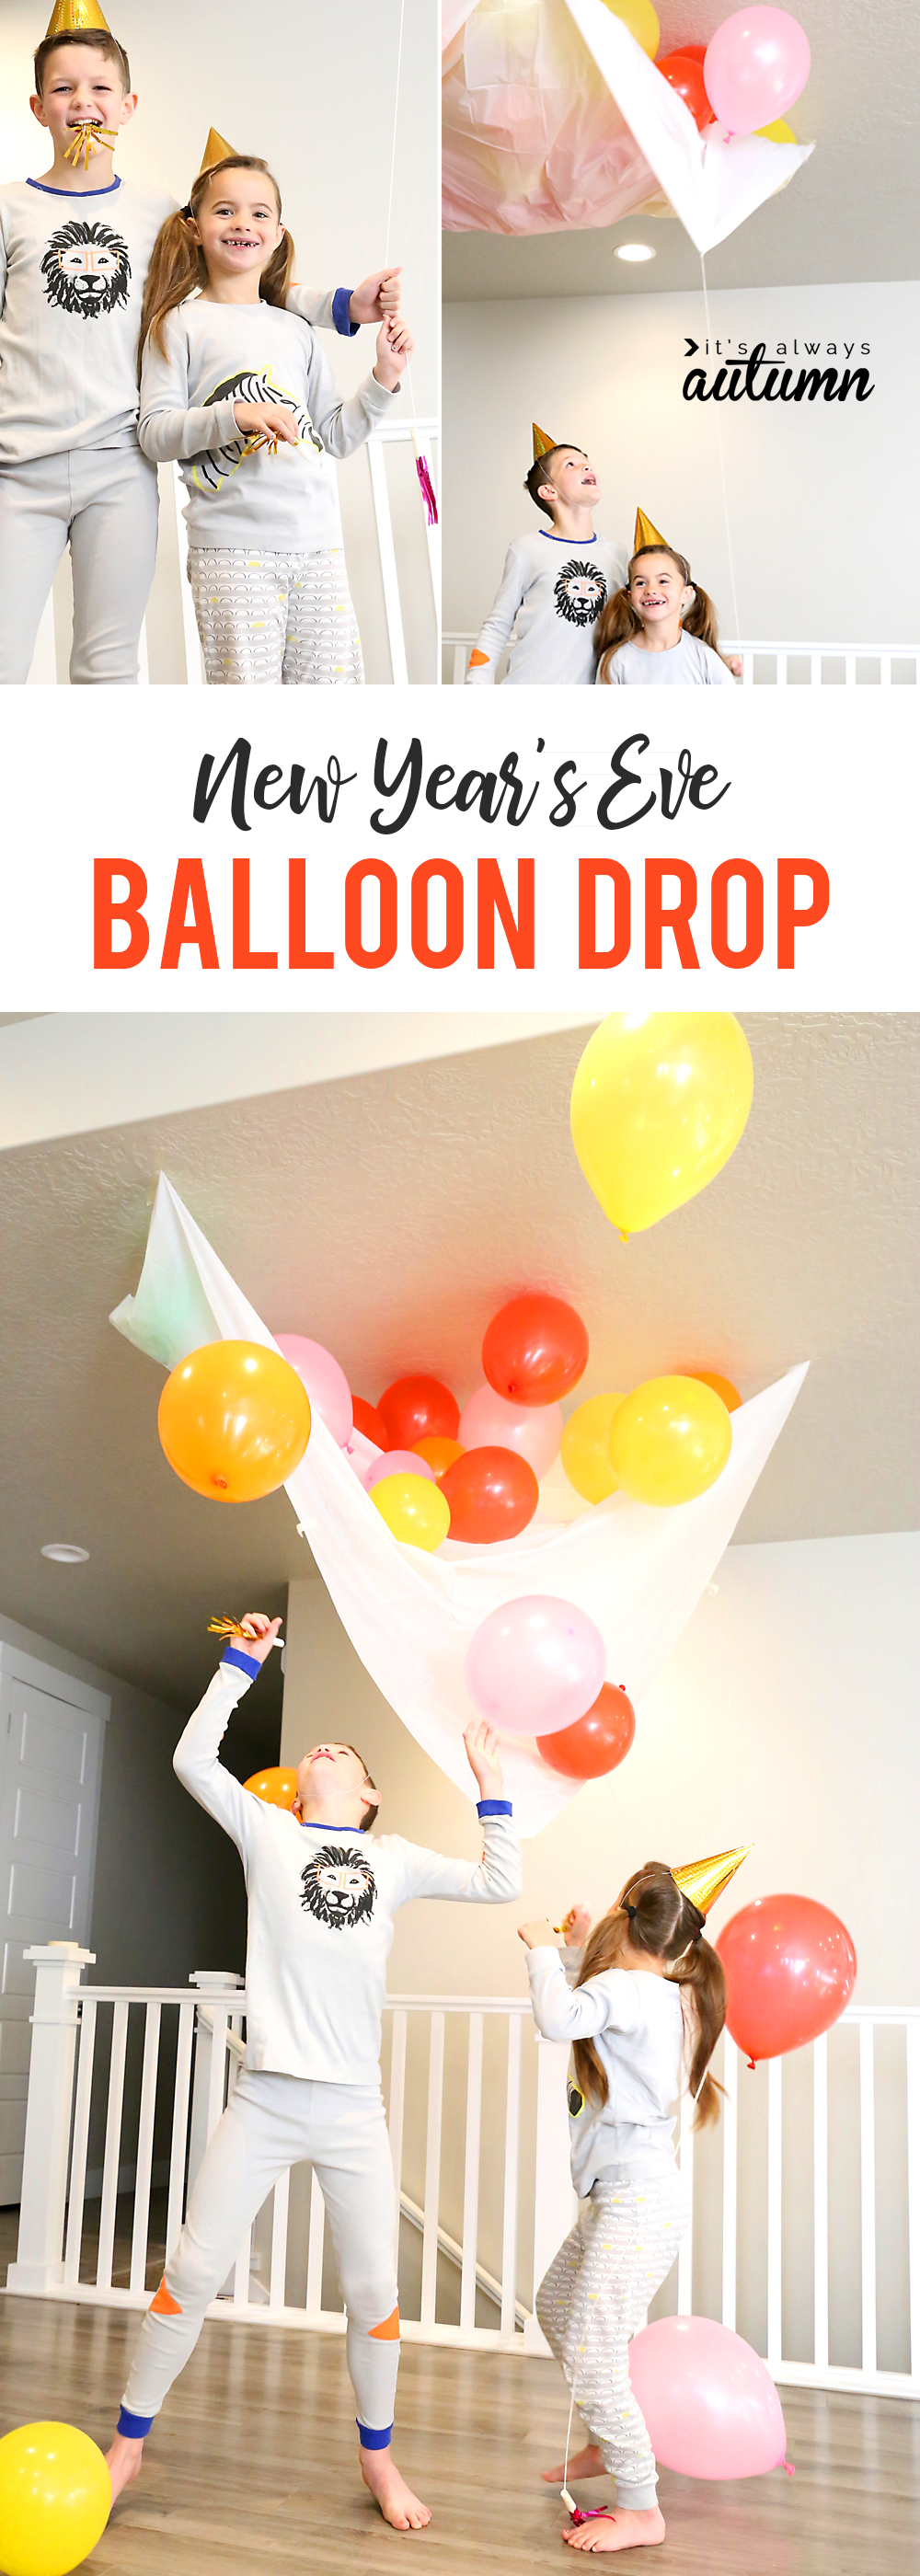 New Year\'s Eve balloon drop at home; kids playing with balloons